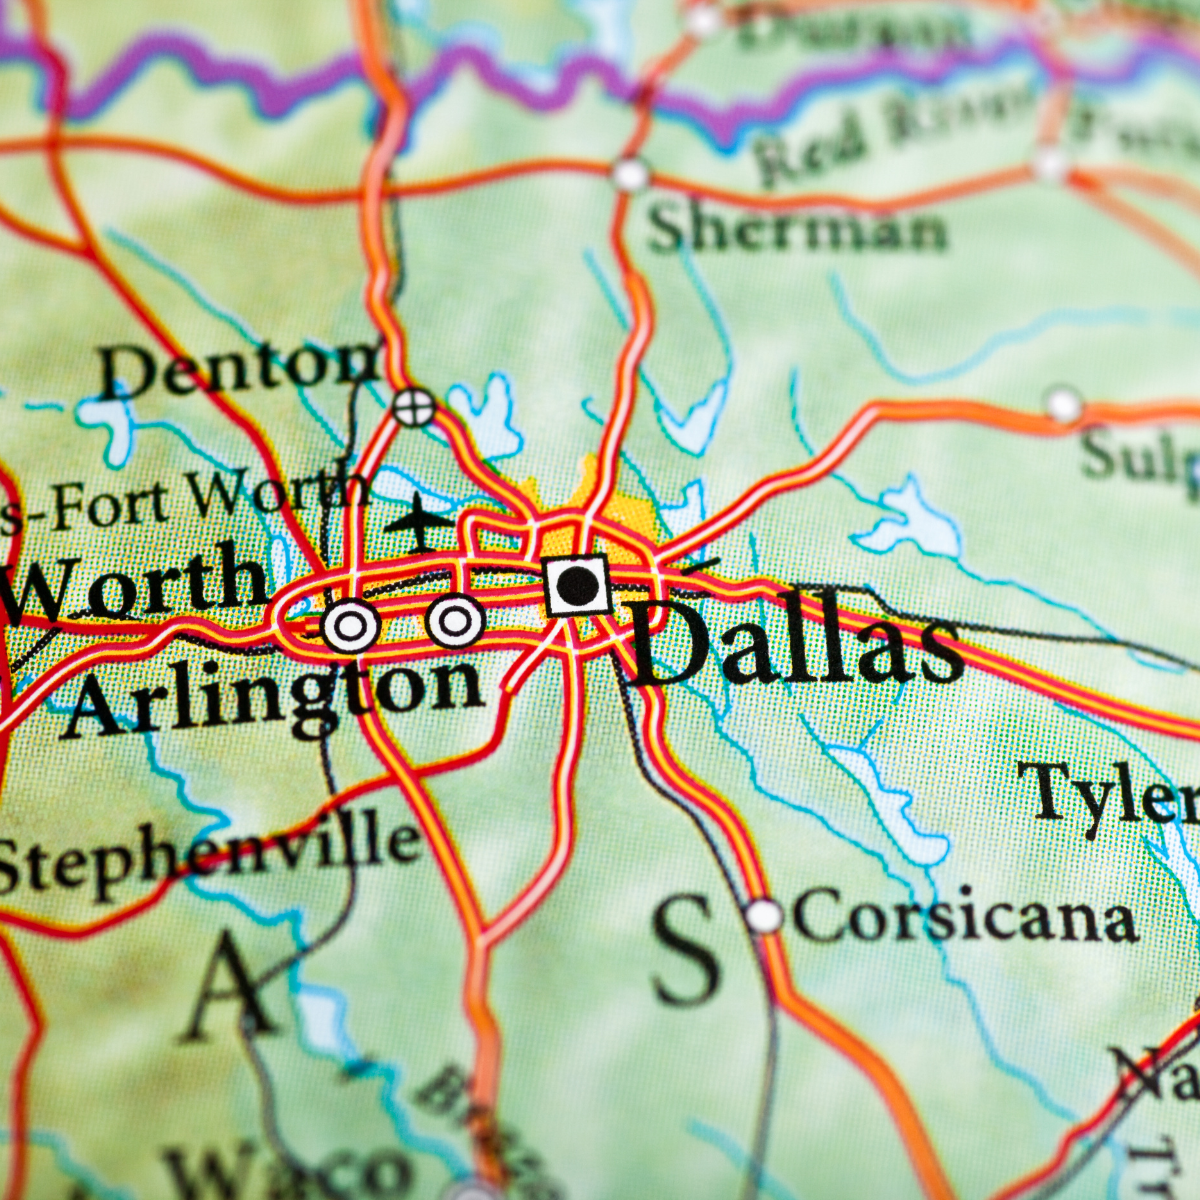 From the High-Five to the Galleria: Everything You Need to Know About Moving to Dallas